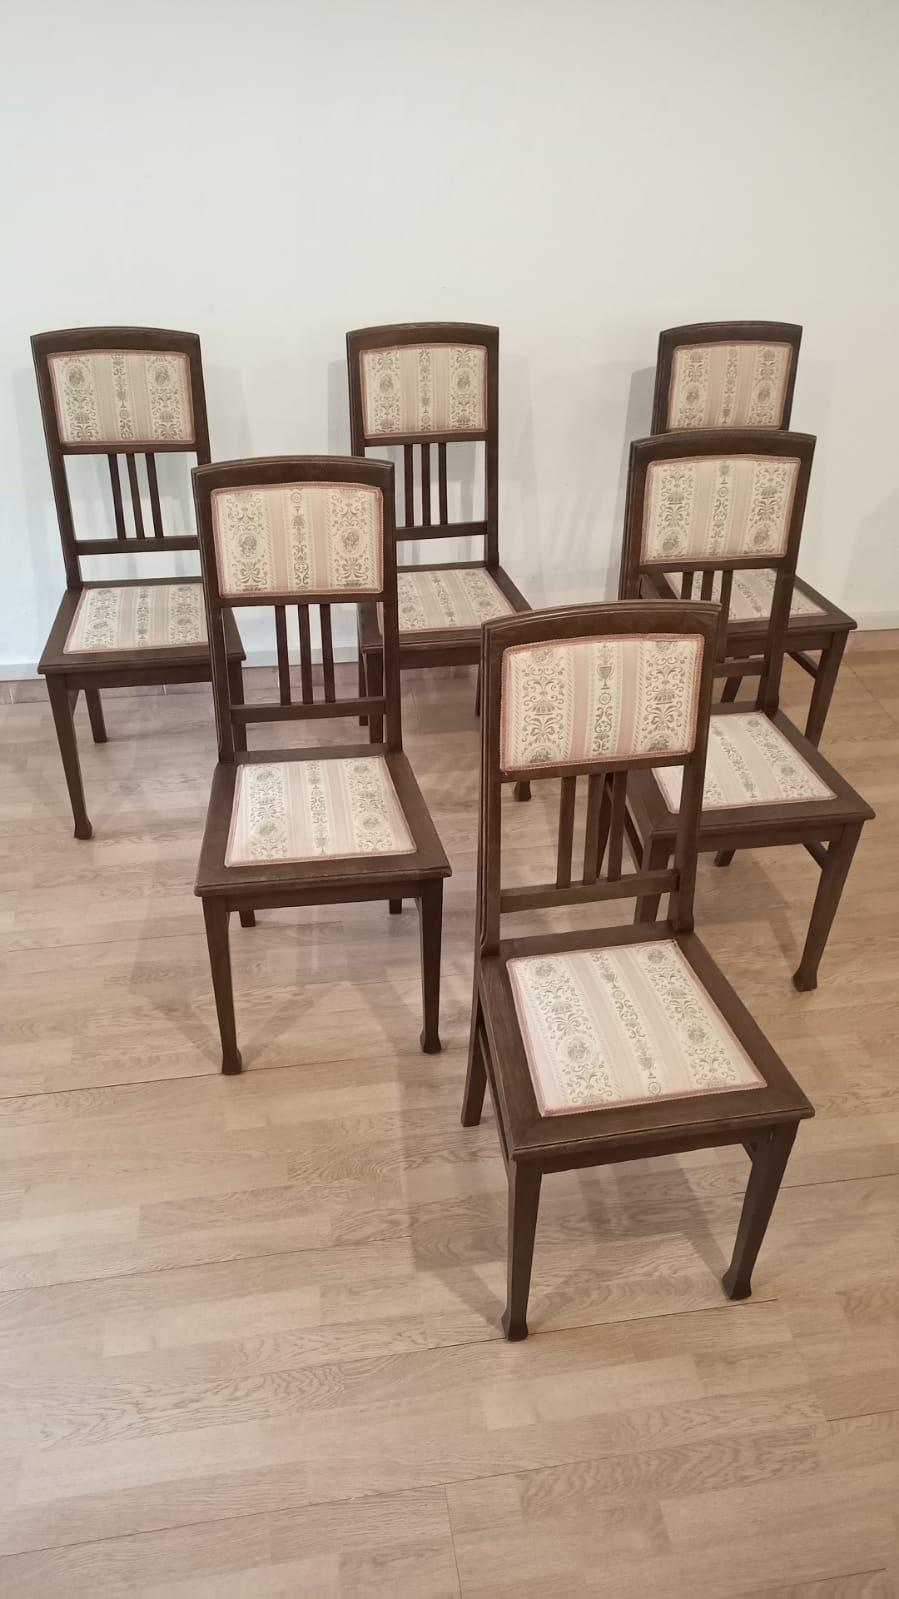 Six vintage oak chairs

Six solid oak chairs. Complete with original upholstery in excellent condition.

Completely made of oak, simple and classic line that adapts to any style of furniture.

Chair dimensions 43cm x 41cm, height 101cm.

We  have a